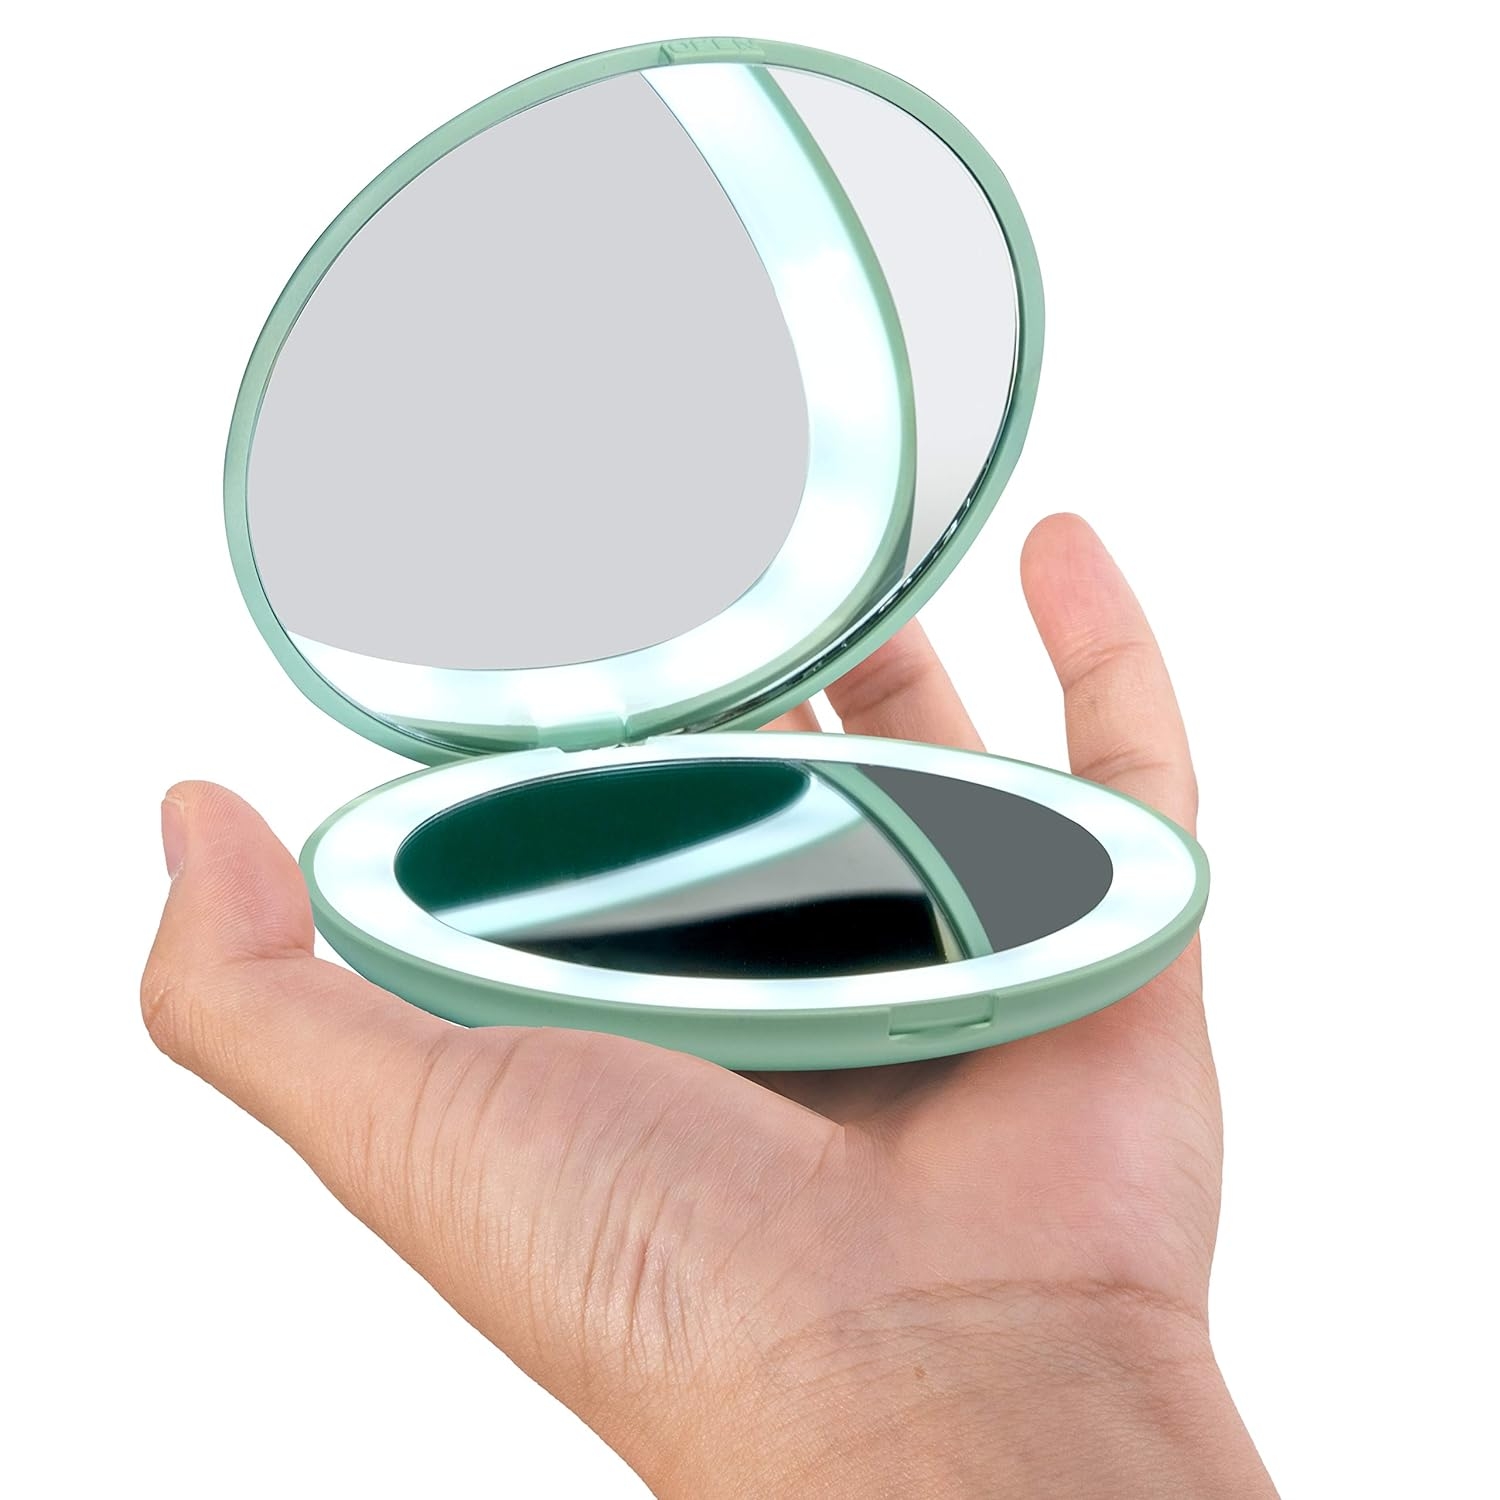 wobsion LED Lighted Travel Makeup Mirror, 1x/10x Magnification Compact Mirror, Portable for Handbag, Purse, Pocket, 3.5 inch Illuminated Folding Mirror, Handheld 2-Sided Mirror, Round, Cyan